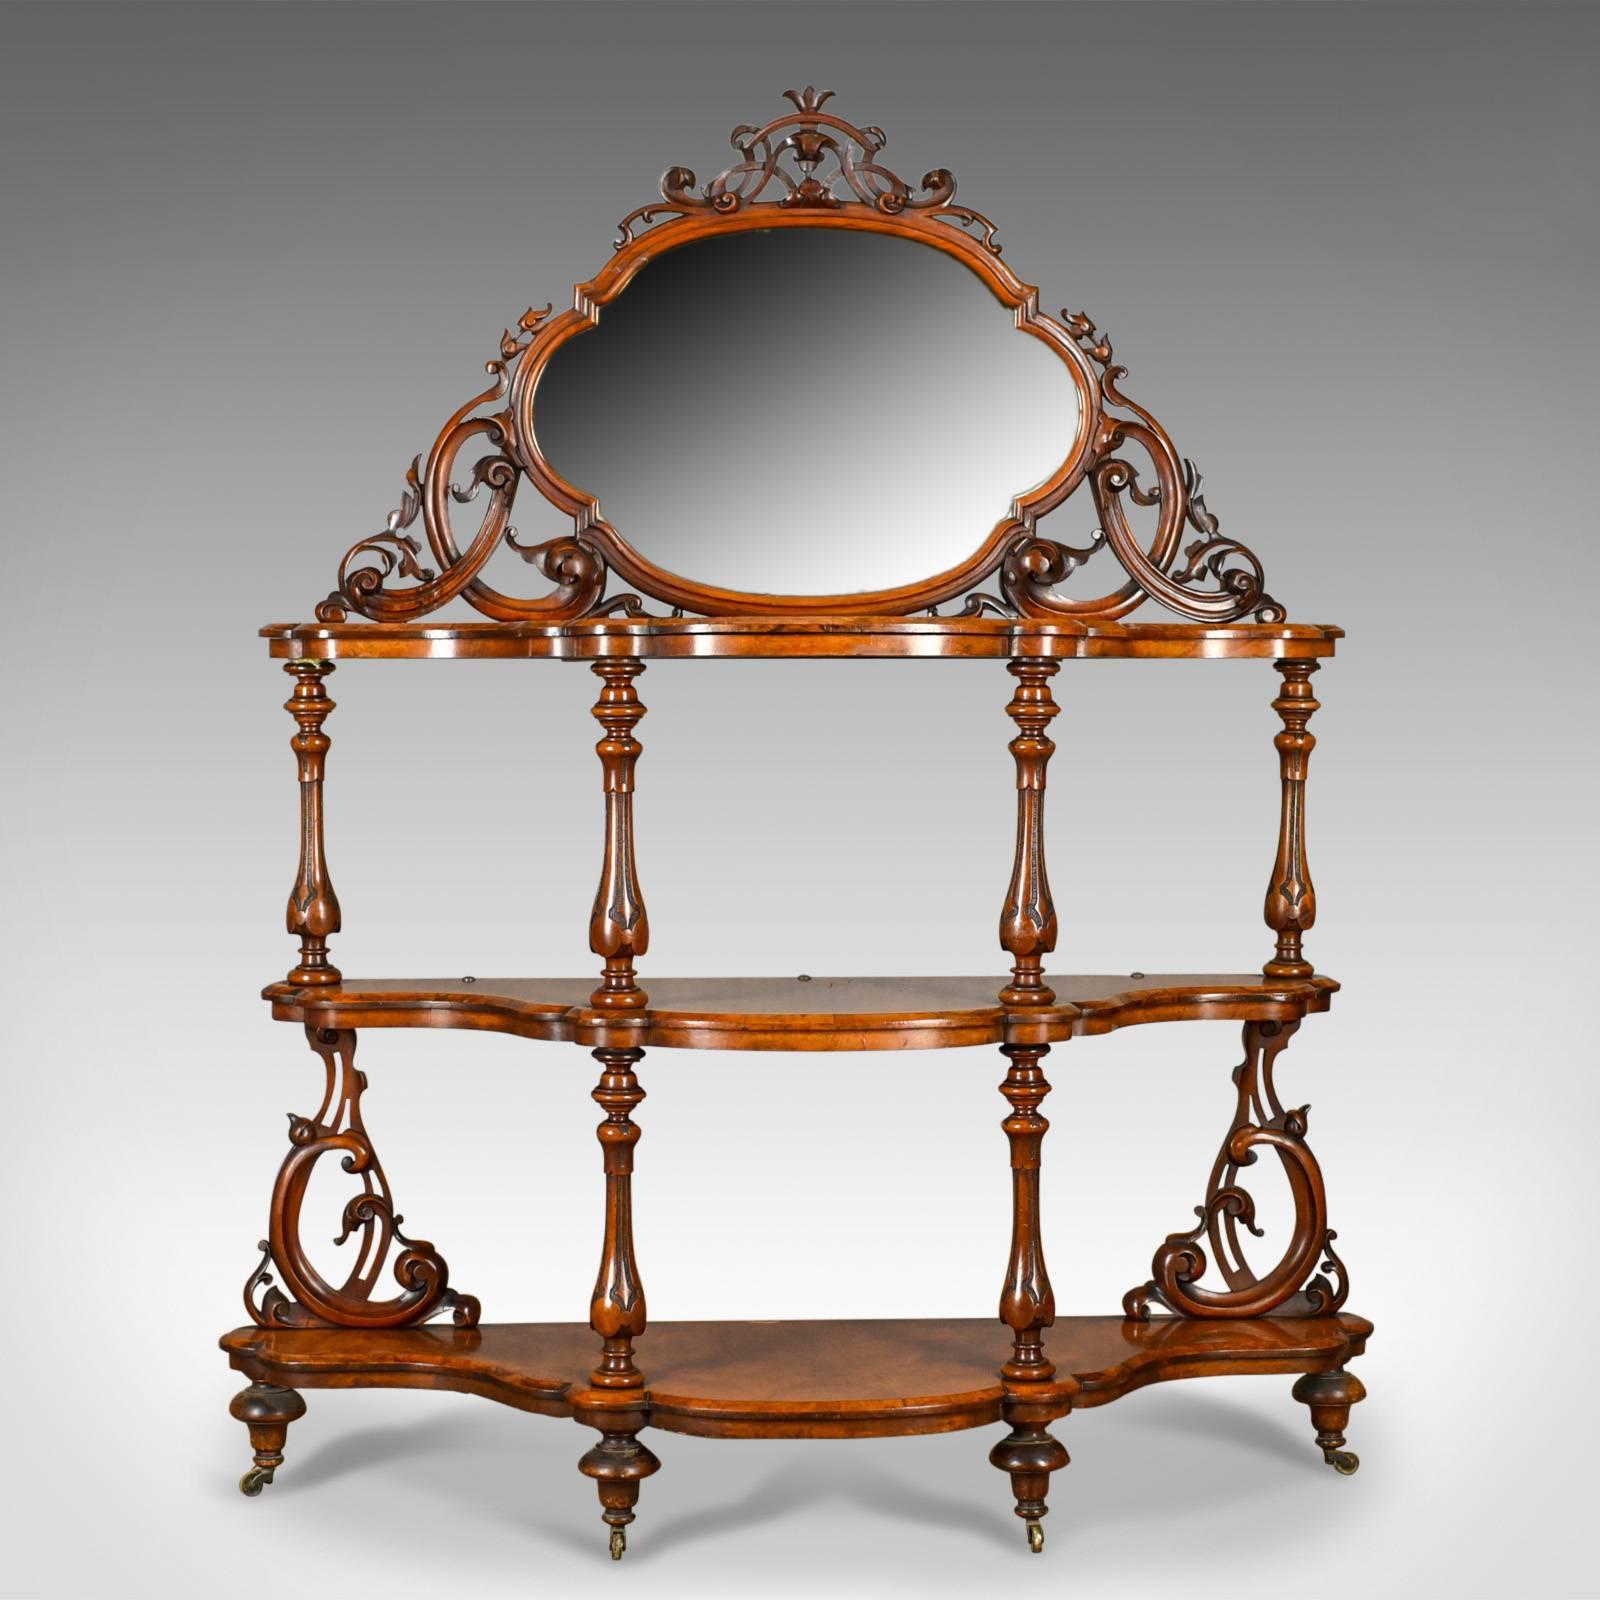 This is an antique whatnot, an Irish, burr walnut, three tier, mirror-back, display Stand by the highly regarded Robert Strahan & Co. firm of Dublin, Ireland. Dating to the early to mid-19th century, circa 1840.

Of exceptional quality befitting